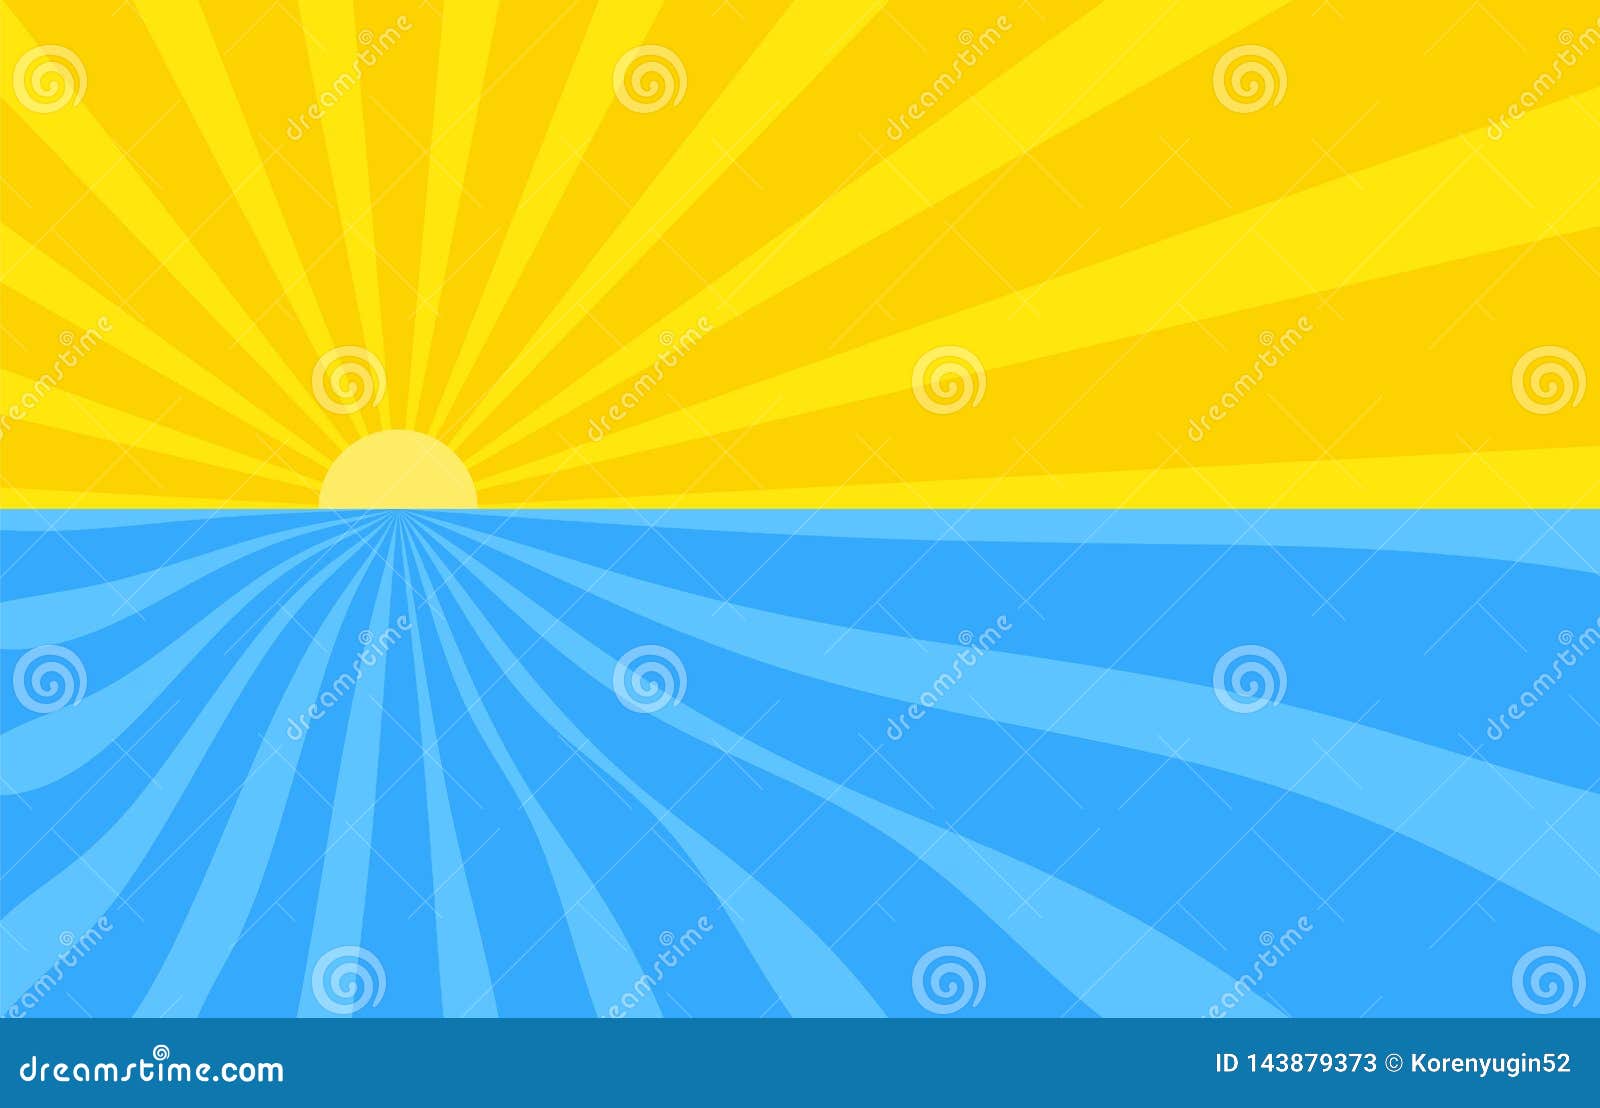 Abstract Background with Cartoon Rays of Yellow and Blue Color. Sun and  Ocean, Summer Template for Your Projects Stock Vector - Illustration of  pattern, poster: 143879373